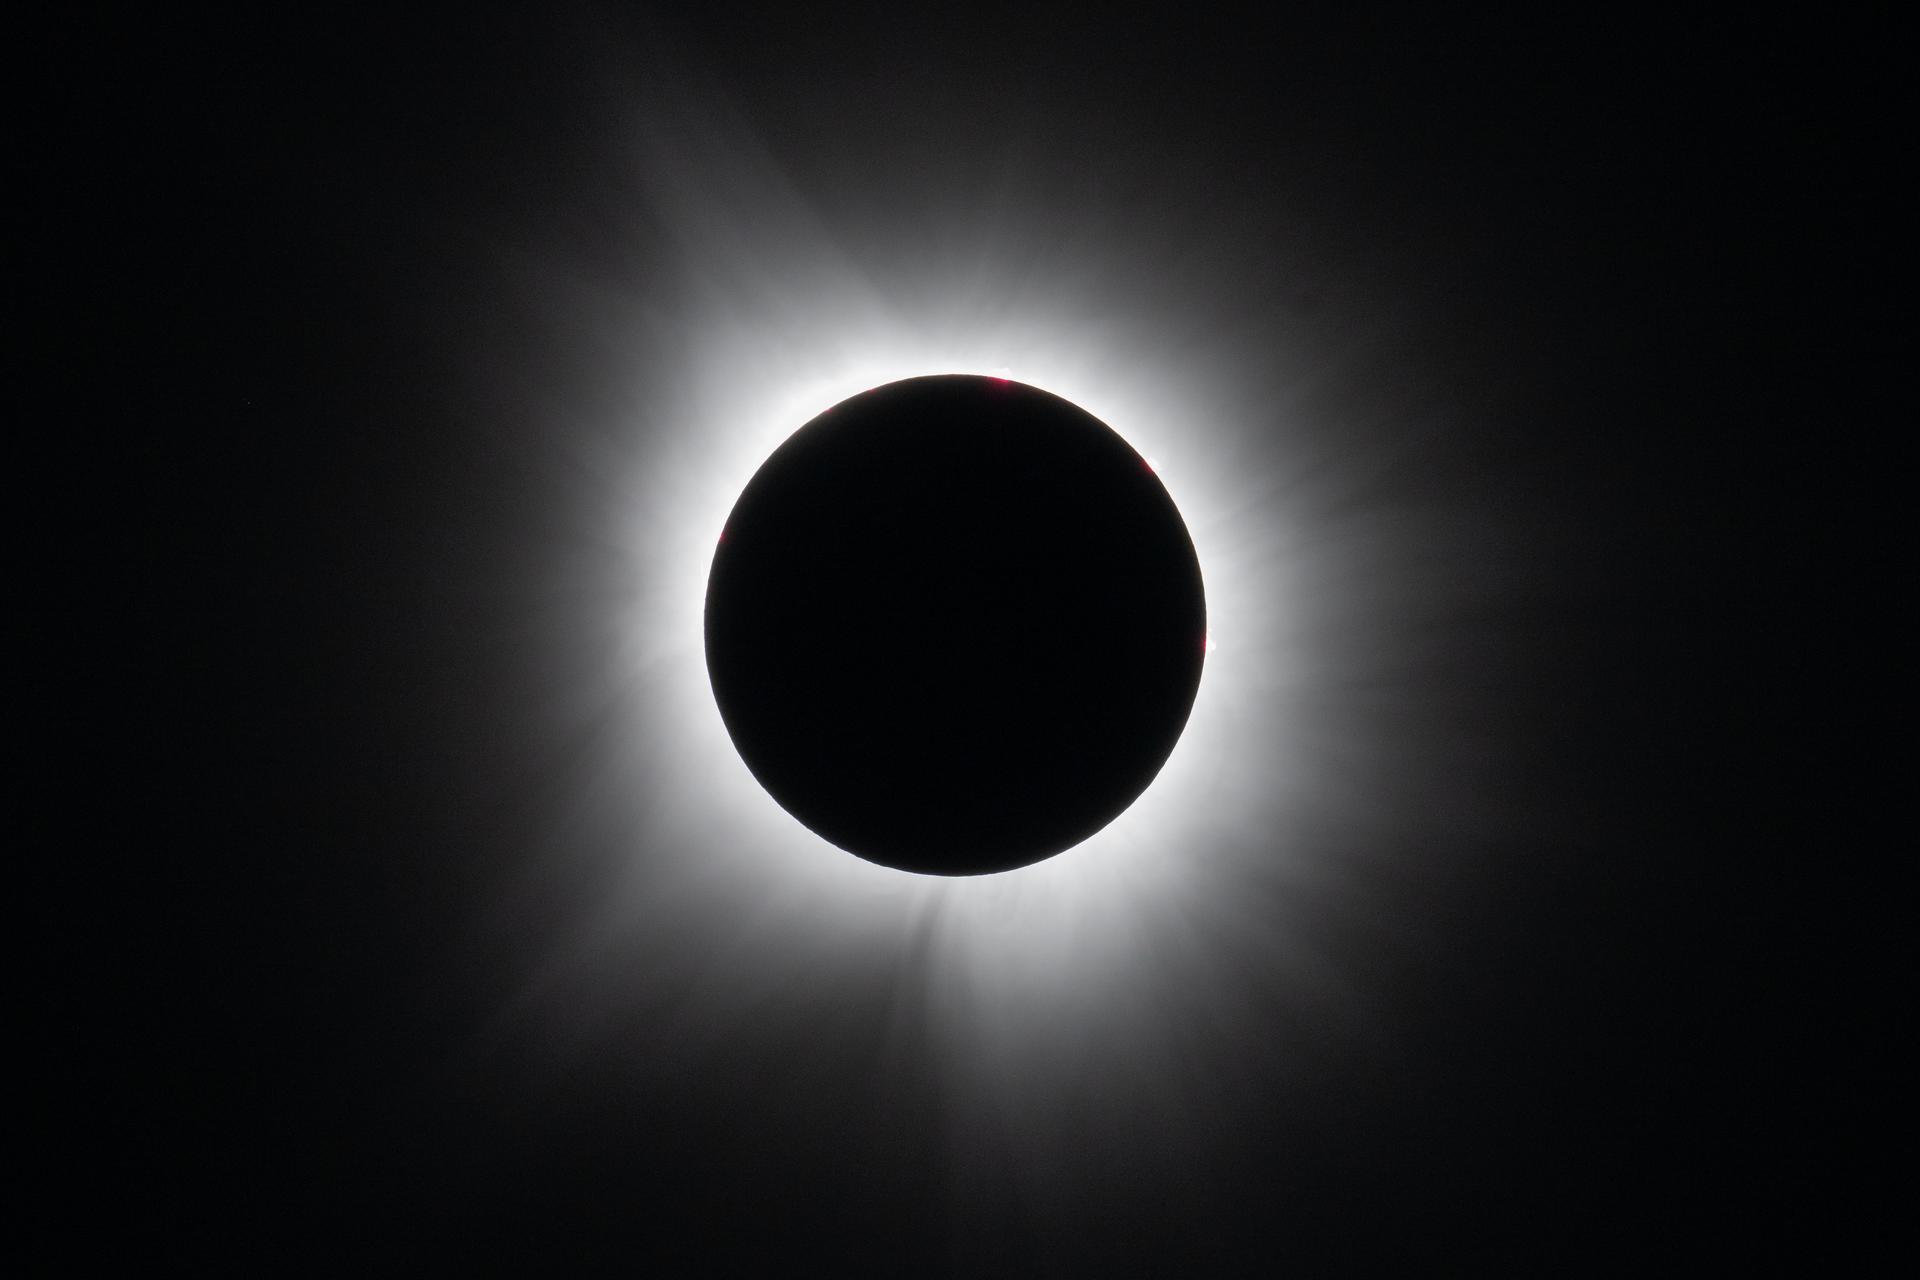 Against a black background, the total solar eclipse. It is a black circle surrounded by white, wispy streams of light that flow away from the black circle in every direction.